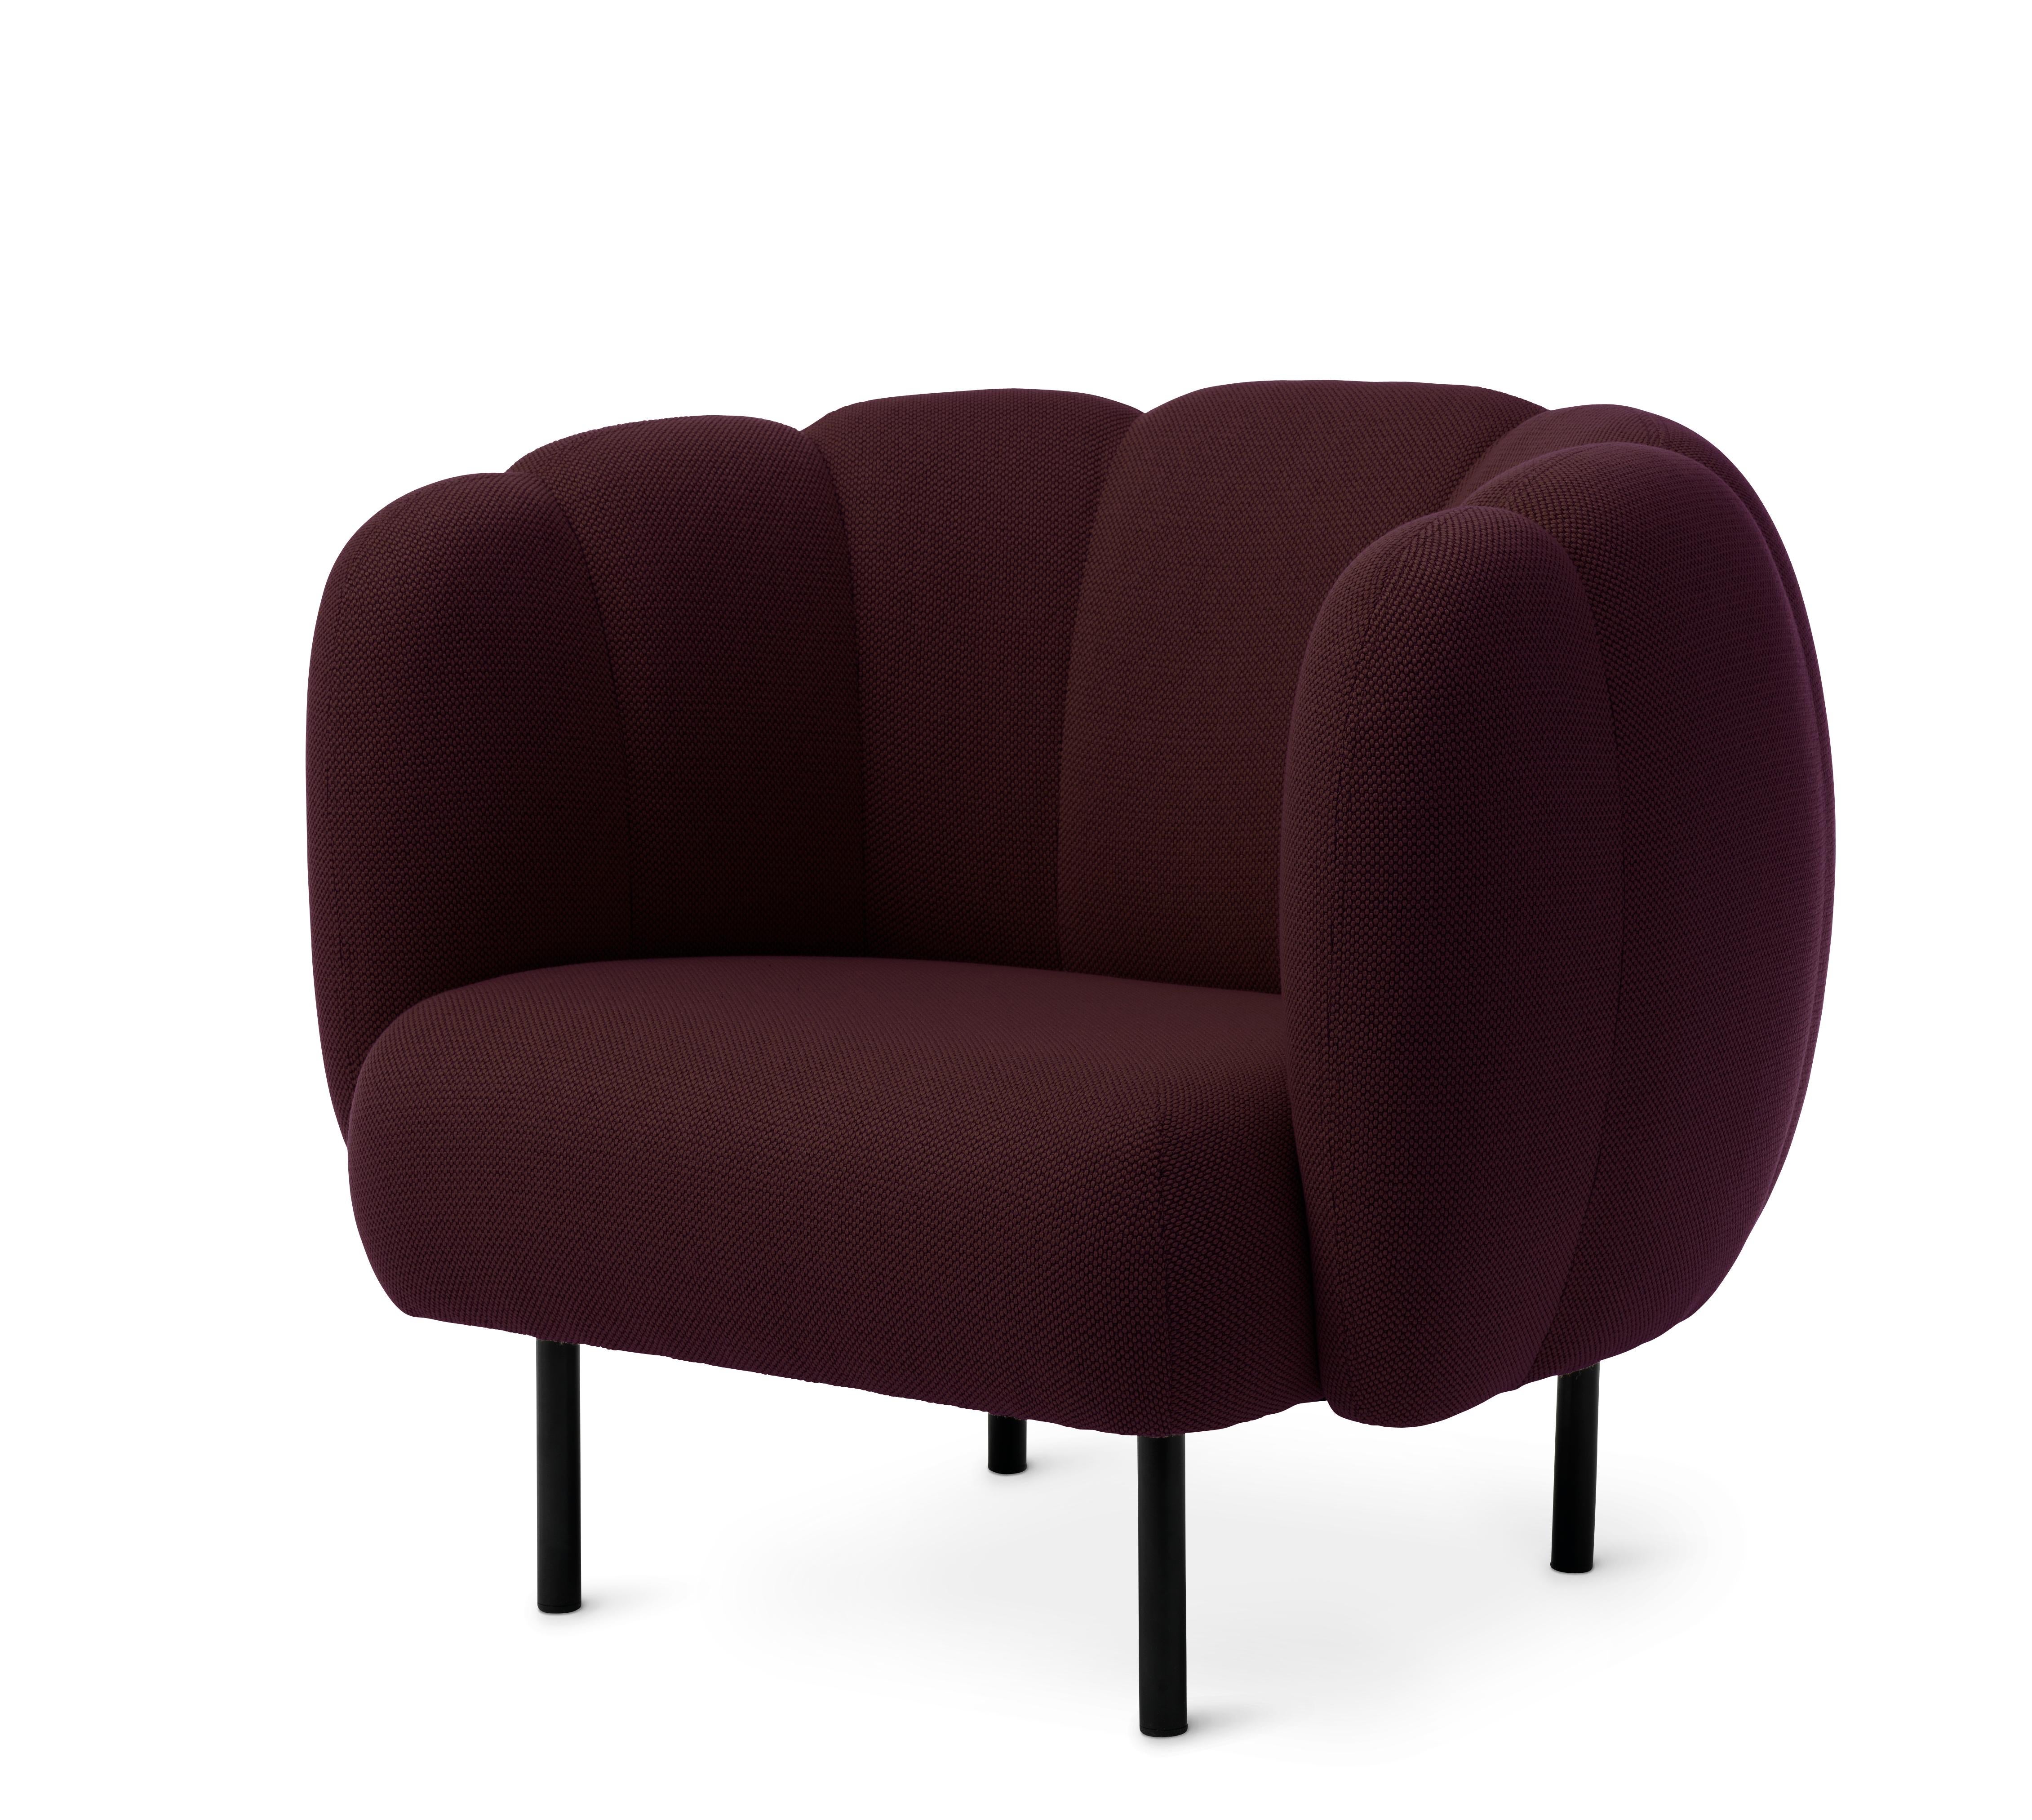 For Sale: Purple (Merit 040) Cape Lounge Chair with Stitches, by Charlotte Høncke from Warm Nordic 2